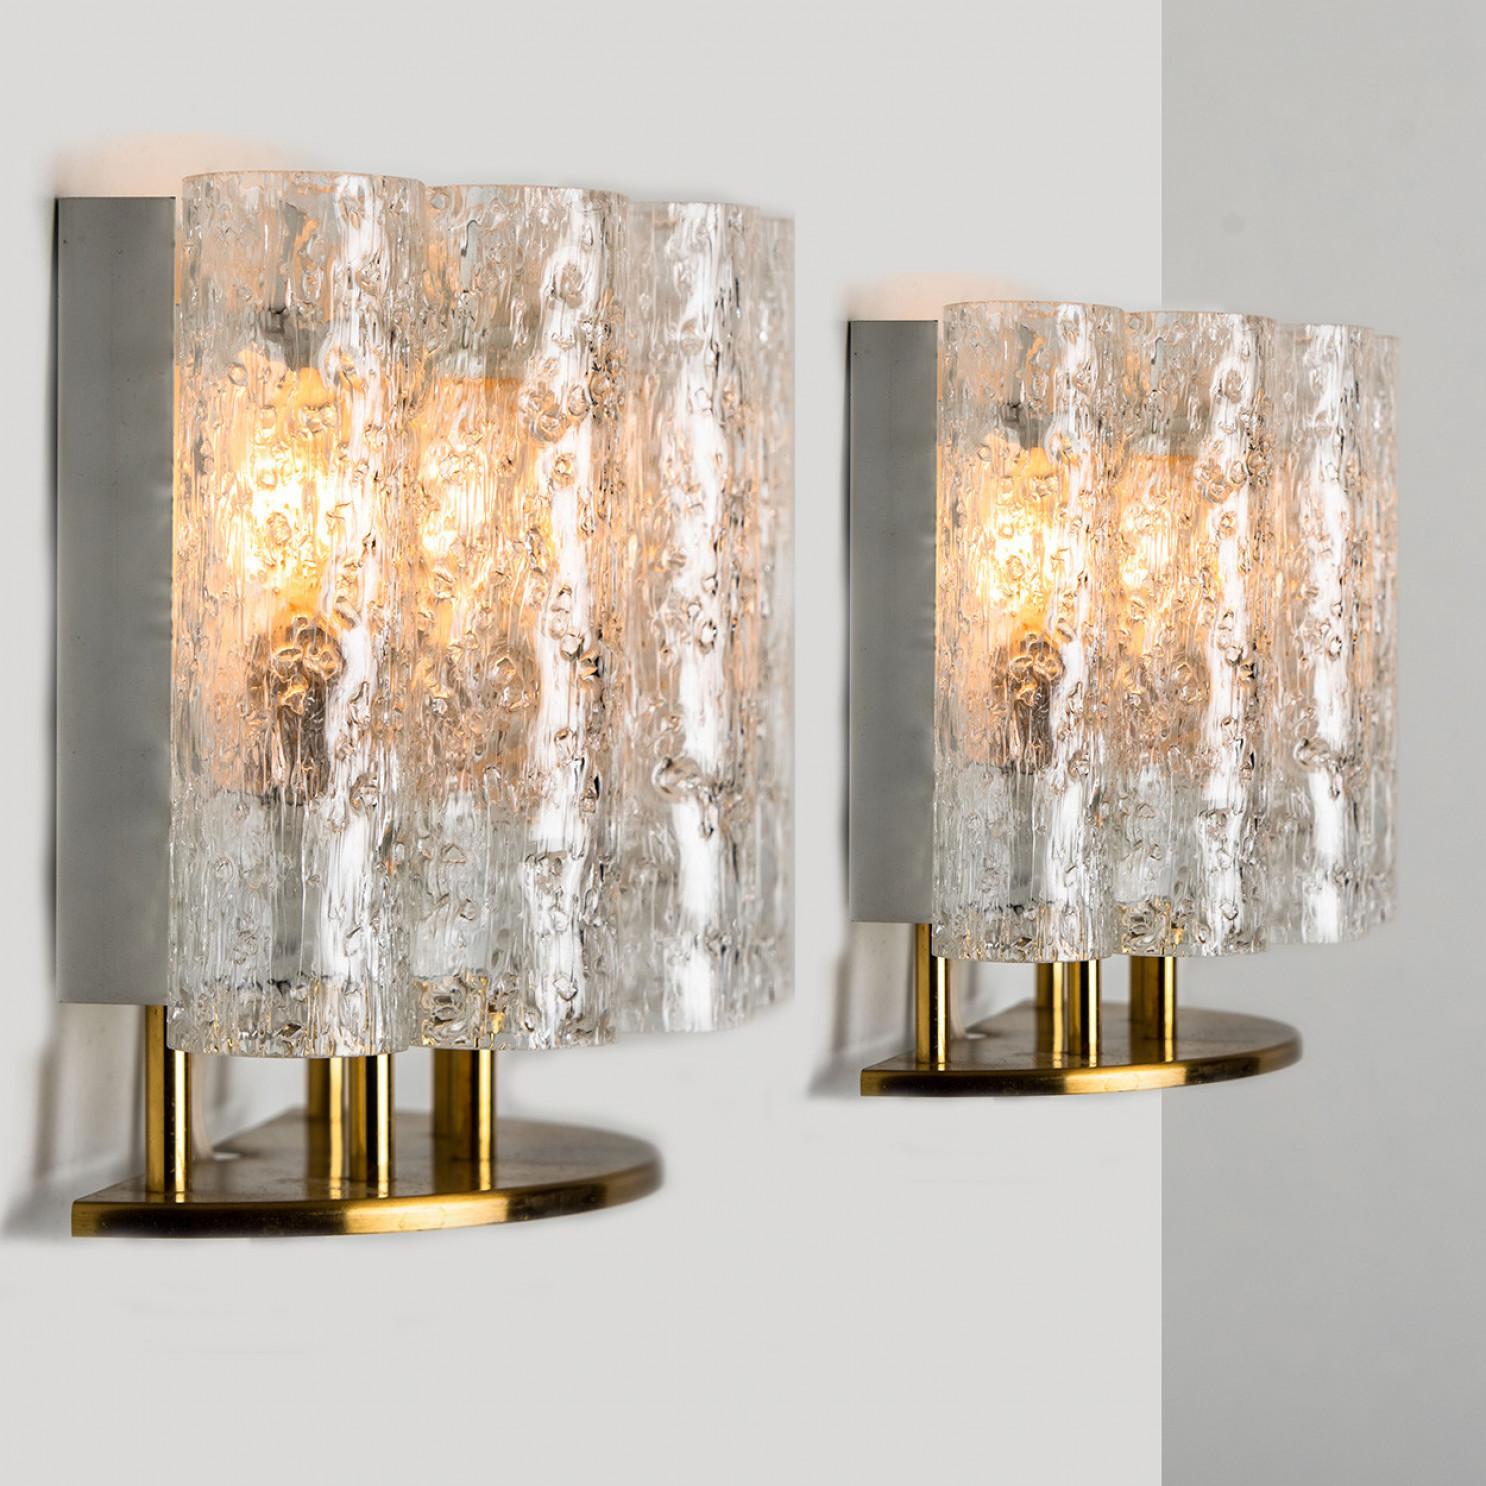 Doria Wall Brass and Glass Wall Lights, 1960s For Sale 1